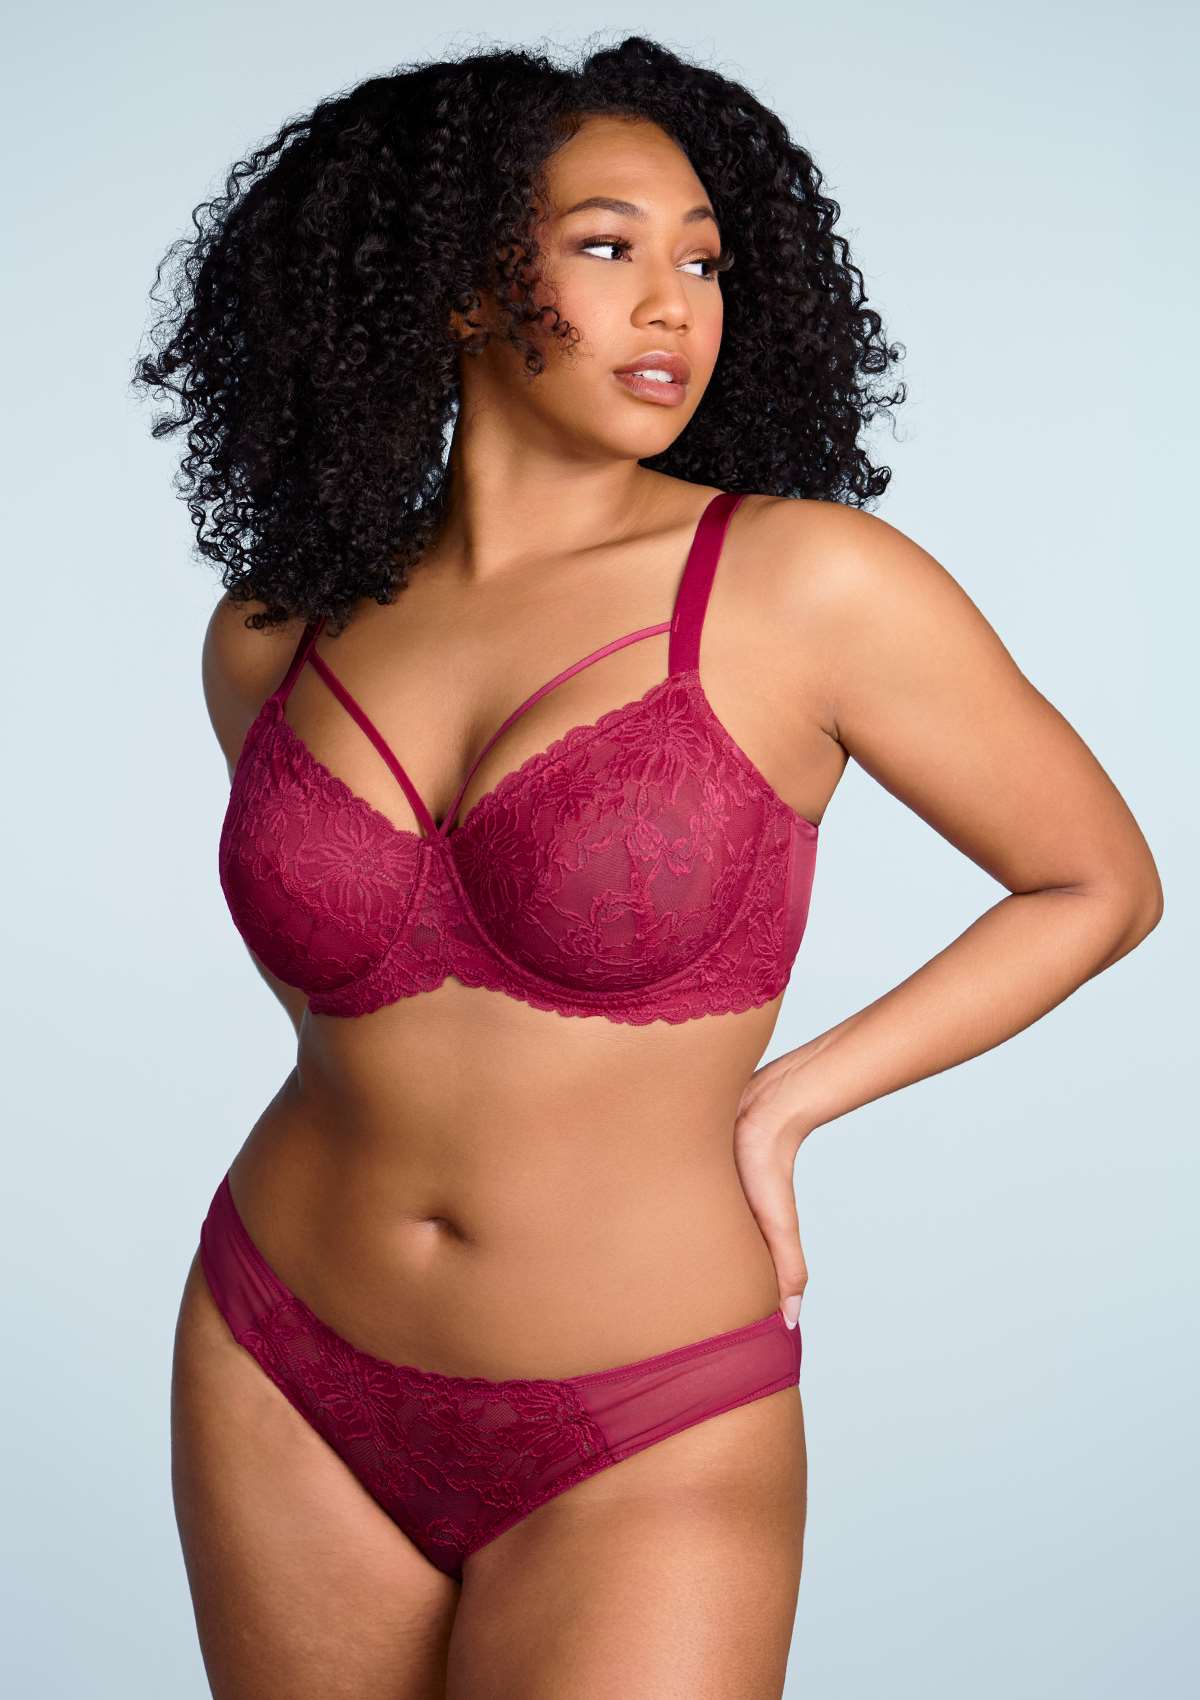 HSIA Pretty In Petals Lace Panties And Bra Set: Plus Size Women Bra - Red / 40 / B